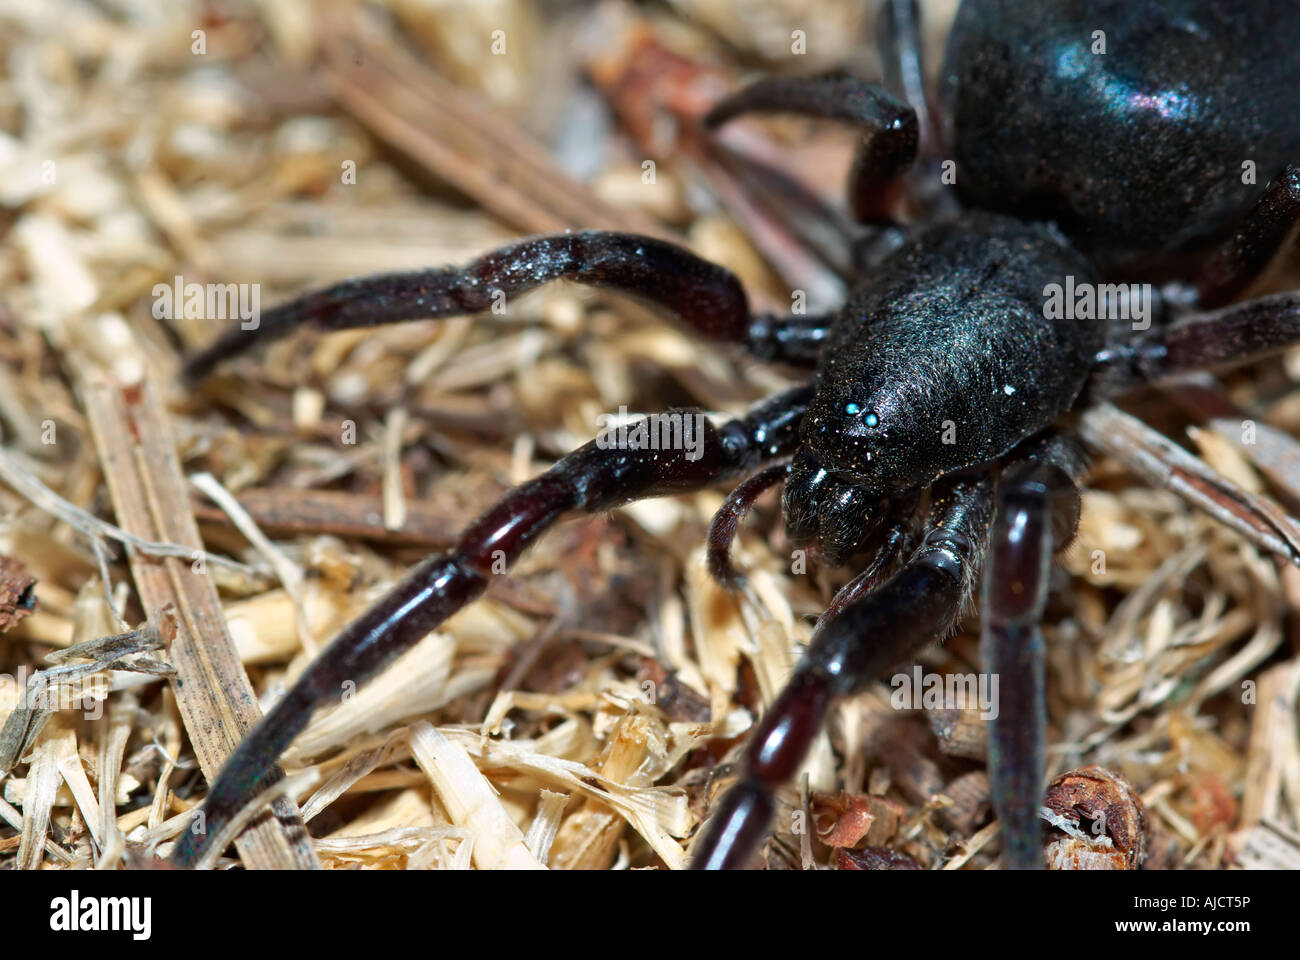 a close up of a big poisonous black spider with long legs in the garden mulch Stock Photo